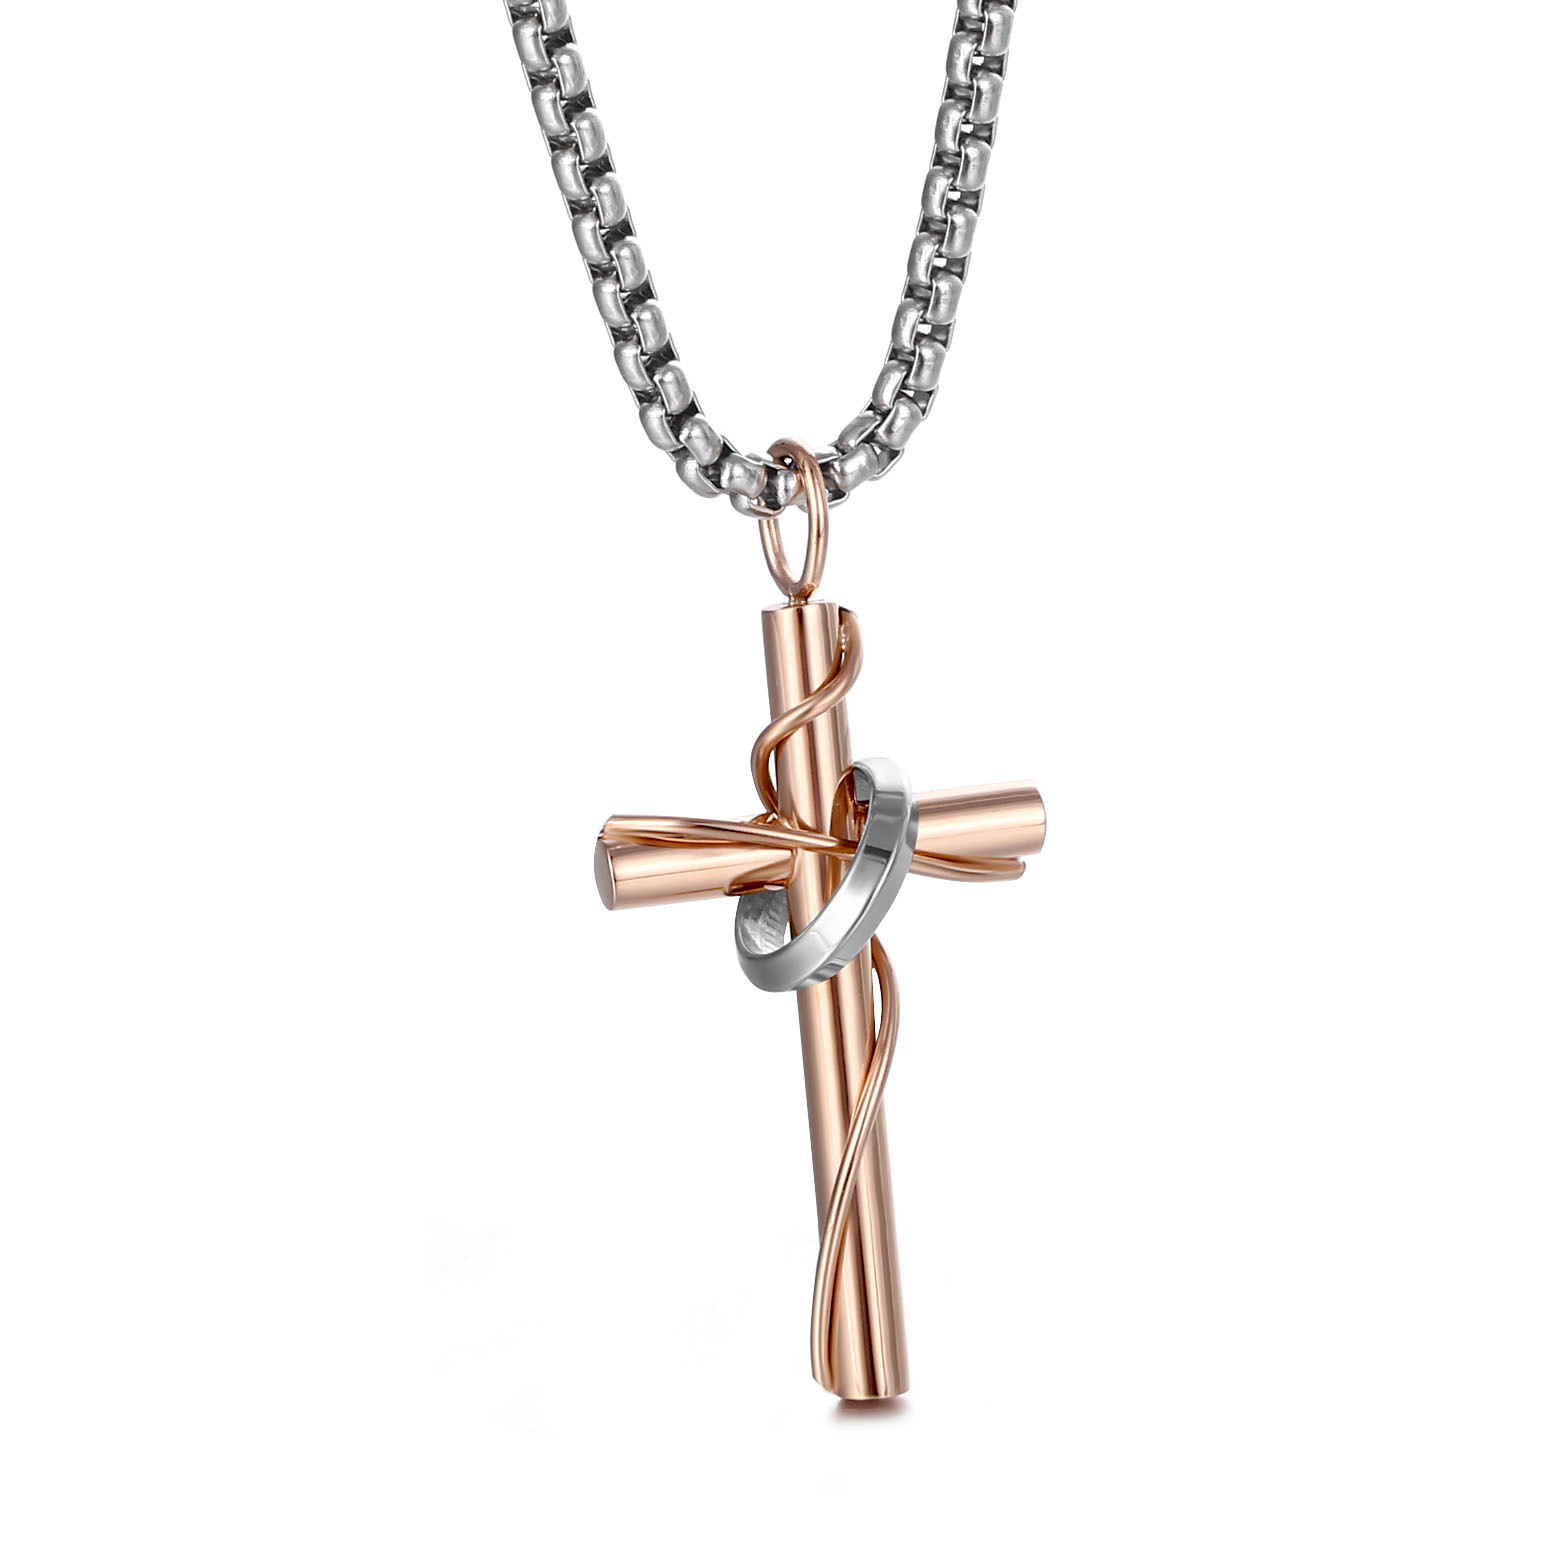 3:Chain free rose gold